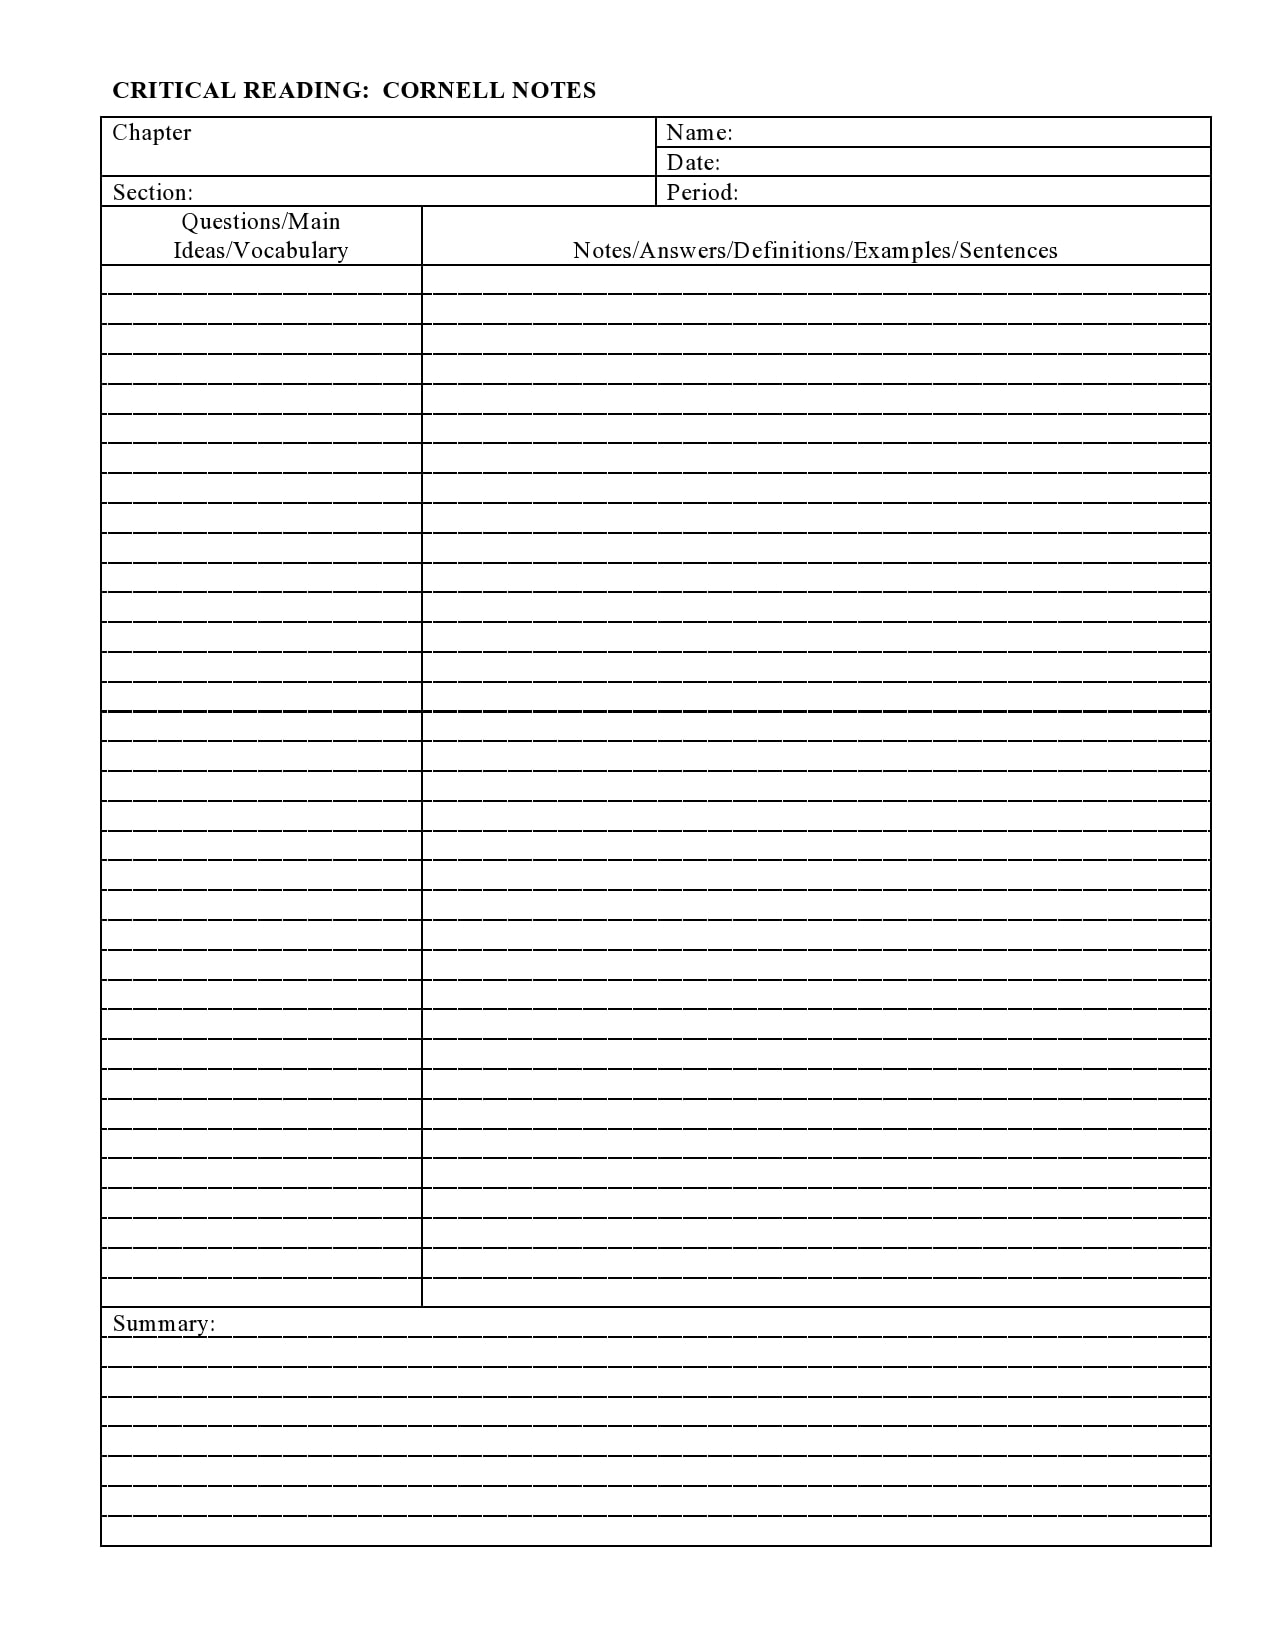 Cornell Note Template Printable from templatearchive.com